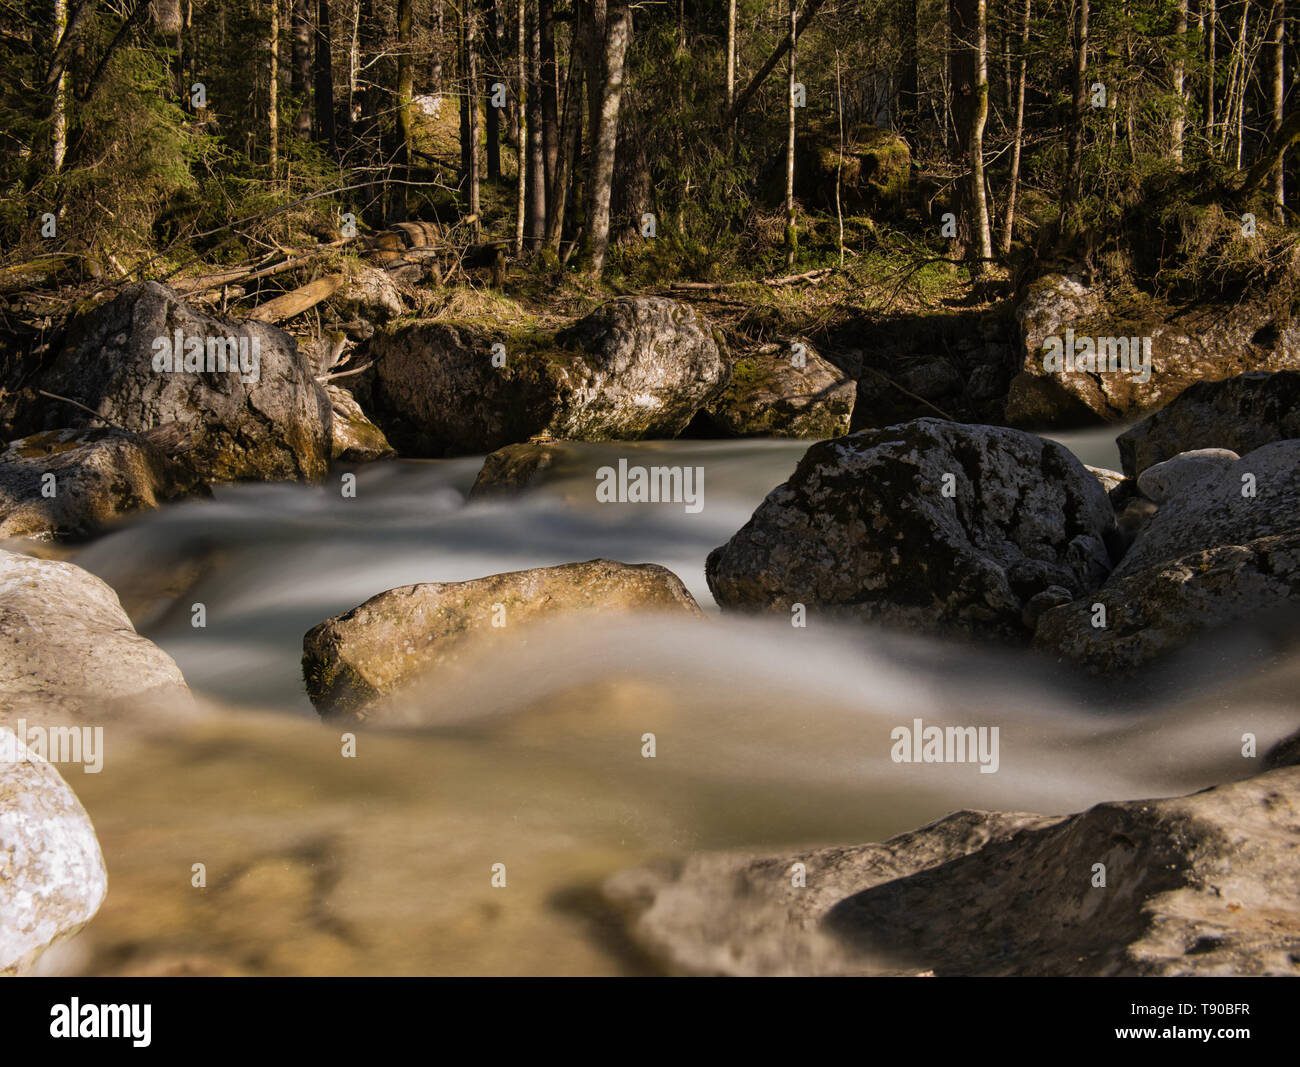 Long-term exposure of a mountain stream in Bavaria with large rocks in the water Stock Photo